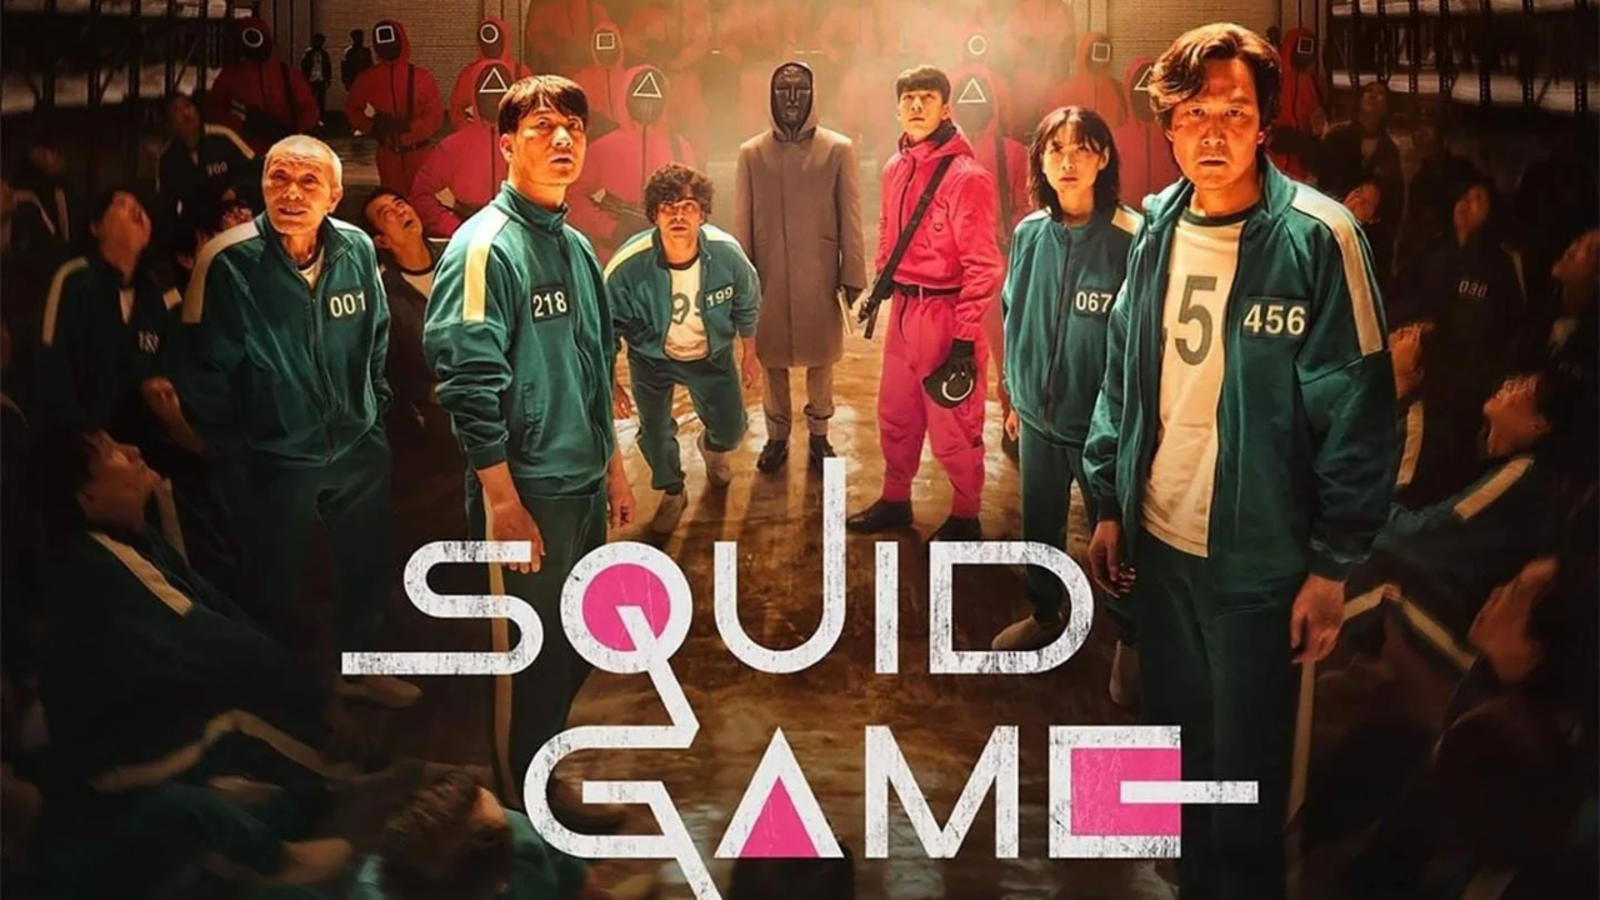 Who is player 067 in Squid Game? Meet the model and new Netflix star